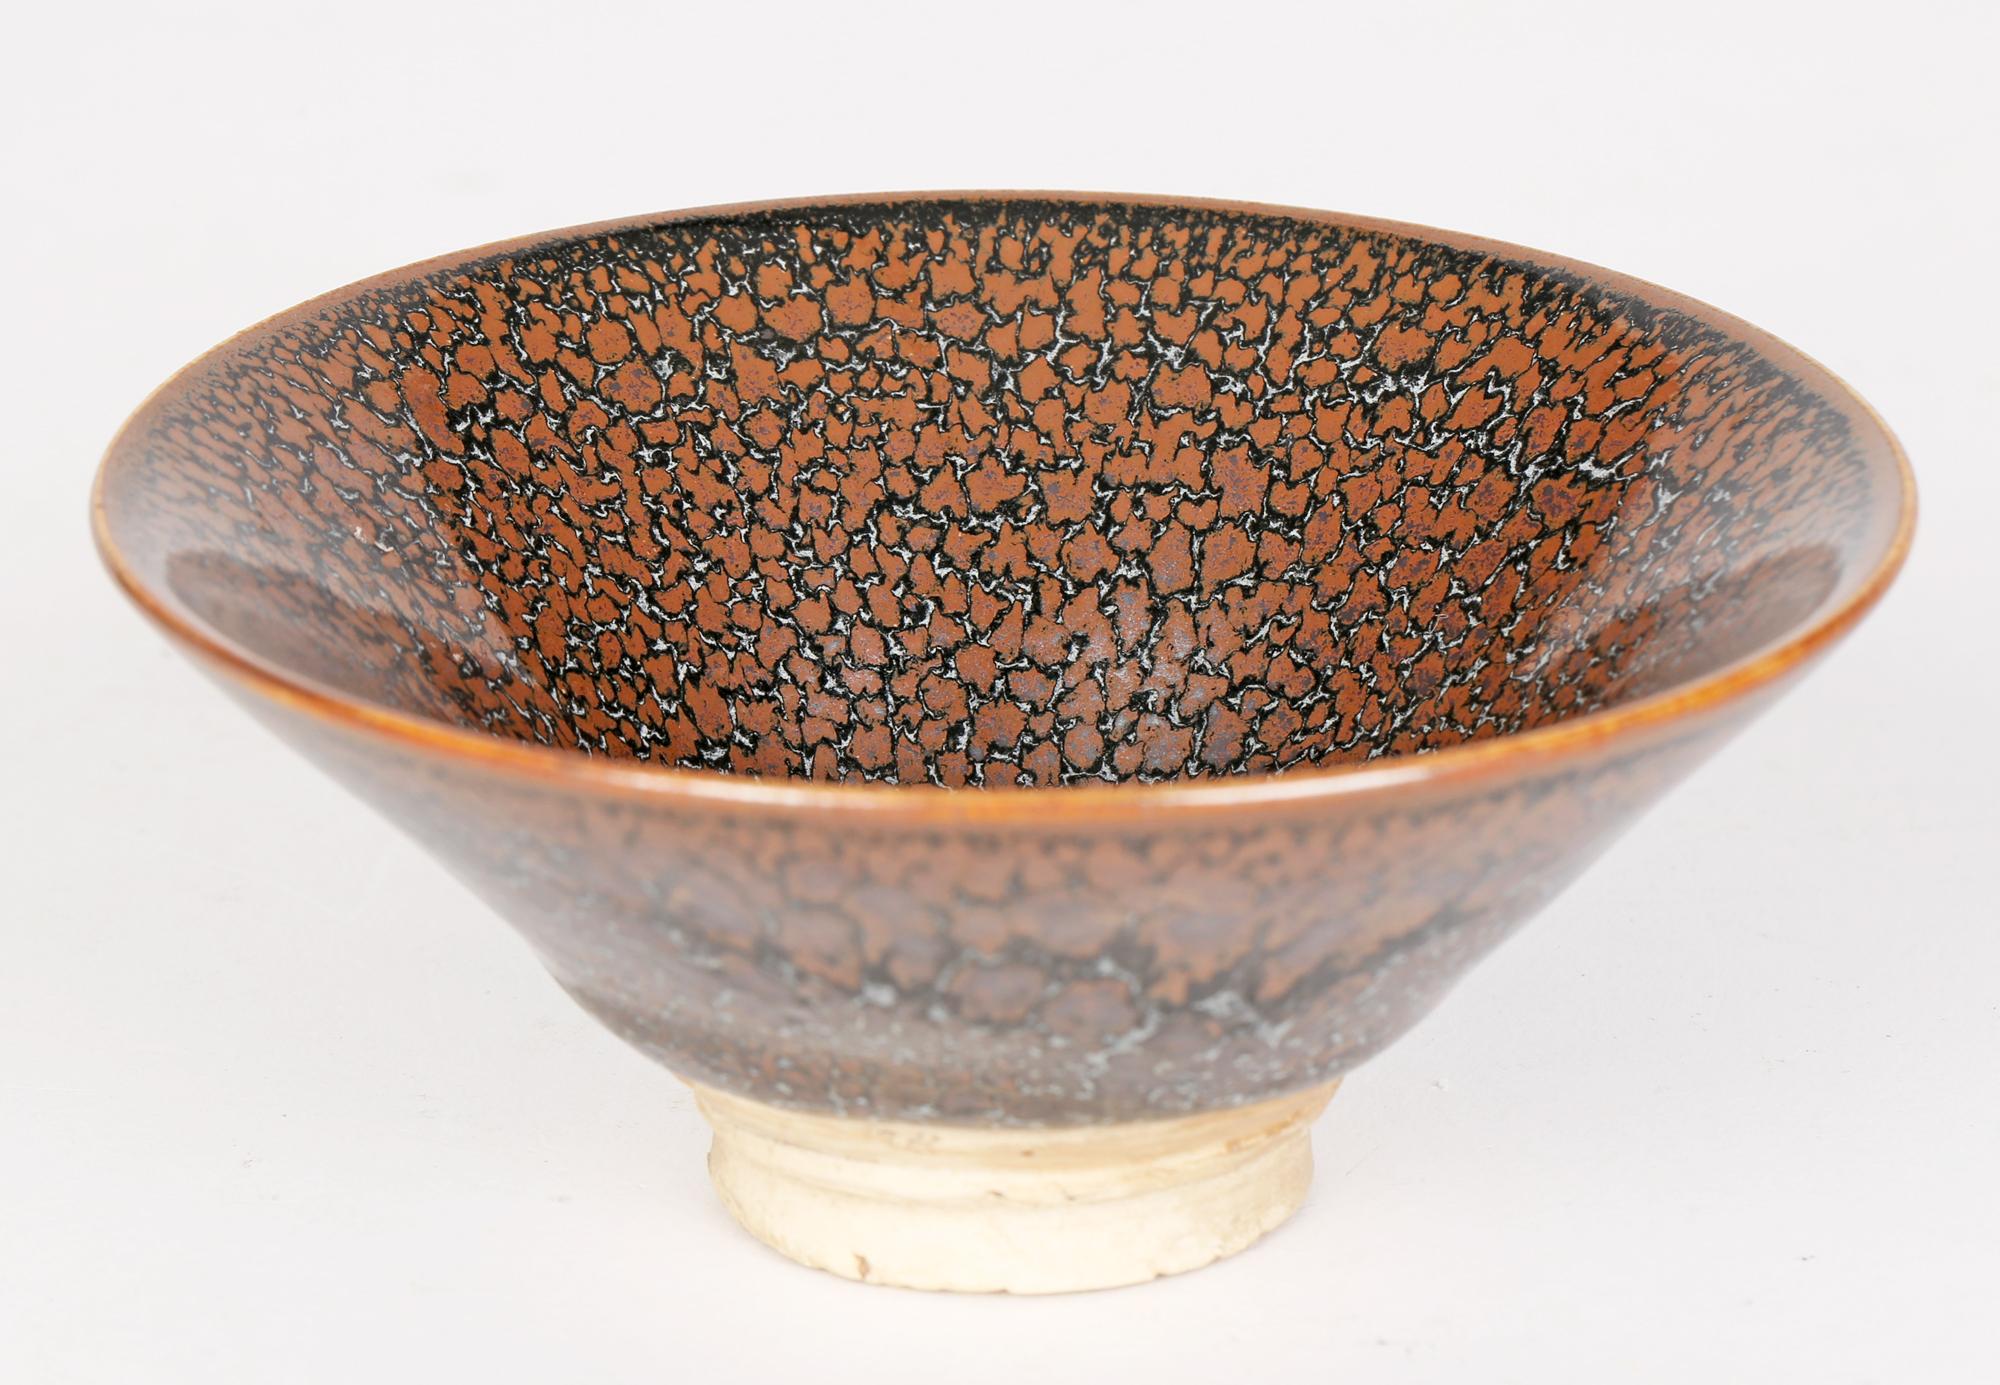 A very impressive and stylish Chinese brown oilspot pattern glazed pottery tea bowl in the Jian Ware style believed to date from the 20th century or possibly earlier. The round conical shaped tea bowl stands on a narrow round unglazed foot and is